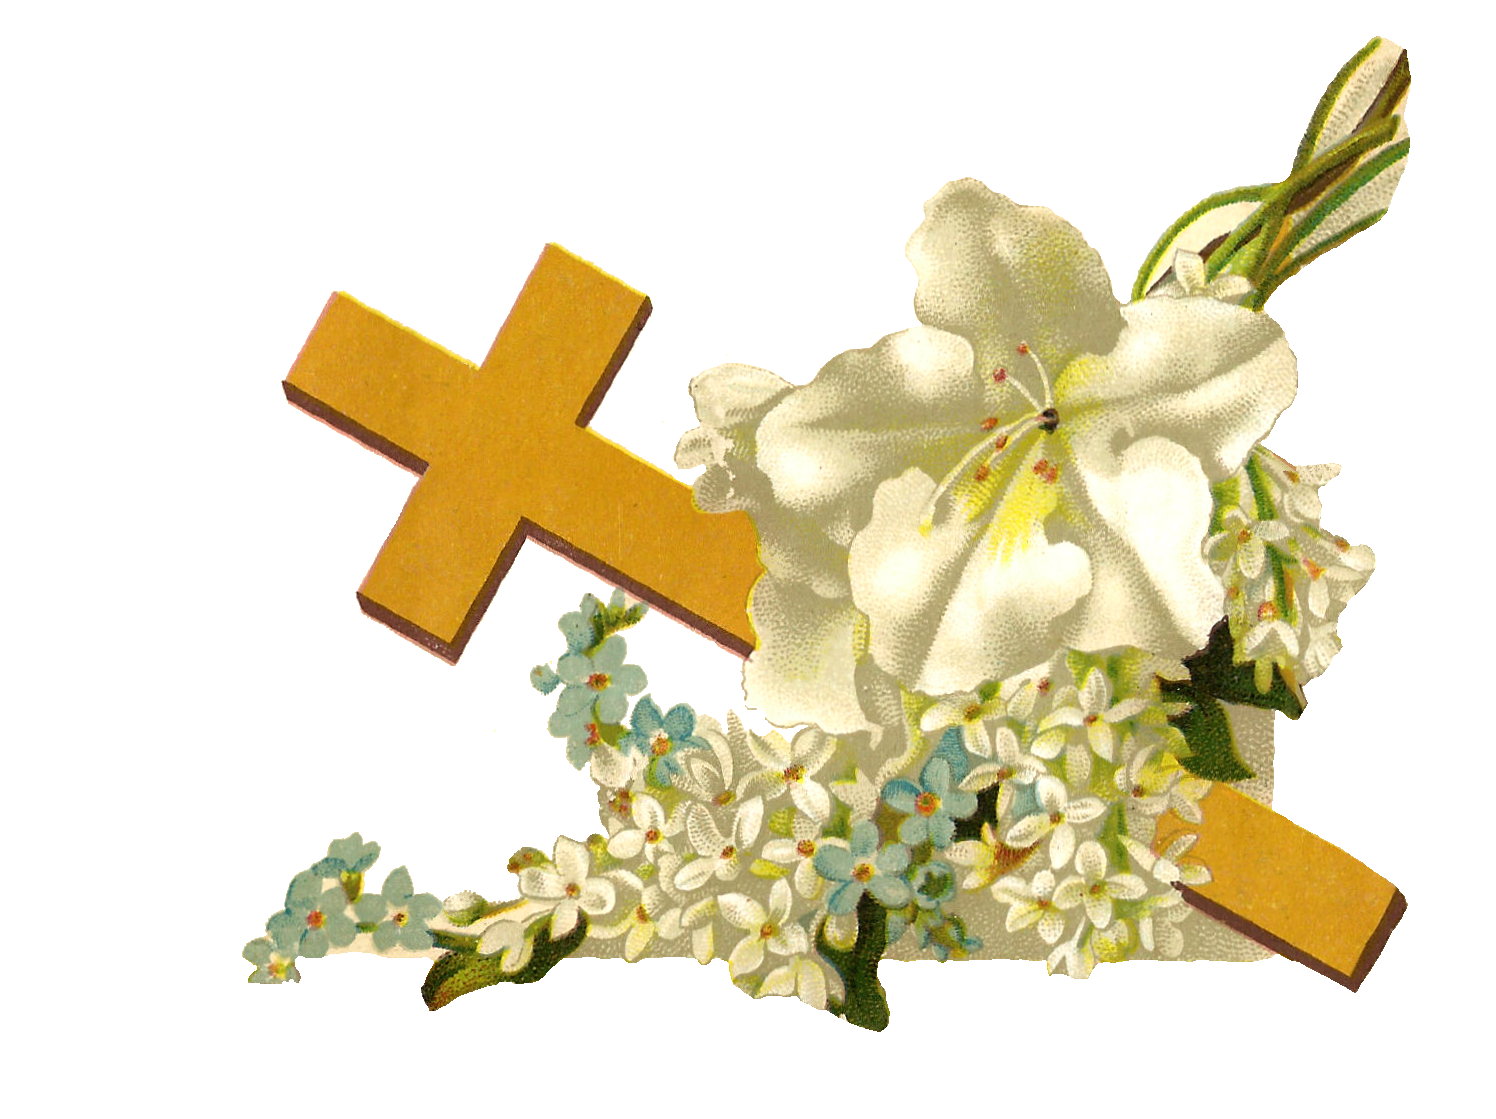 Crucifix clipart skinny cross. And flowers encode to